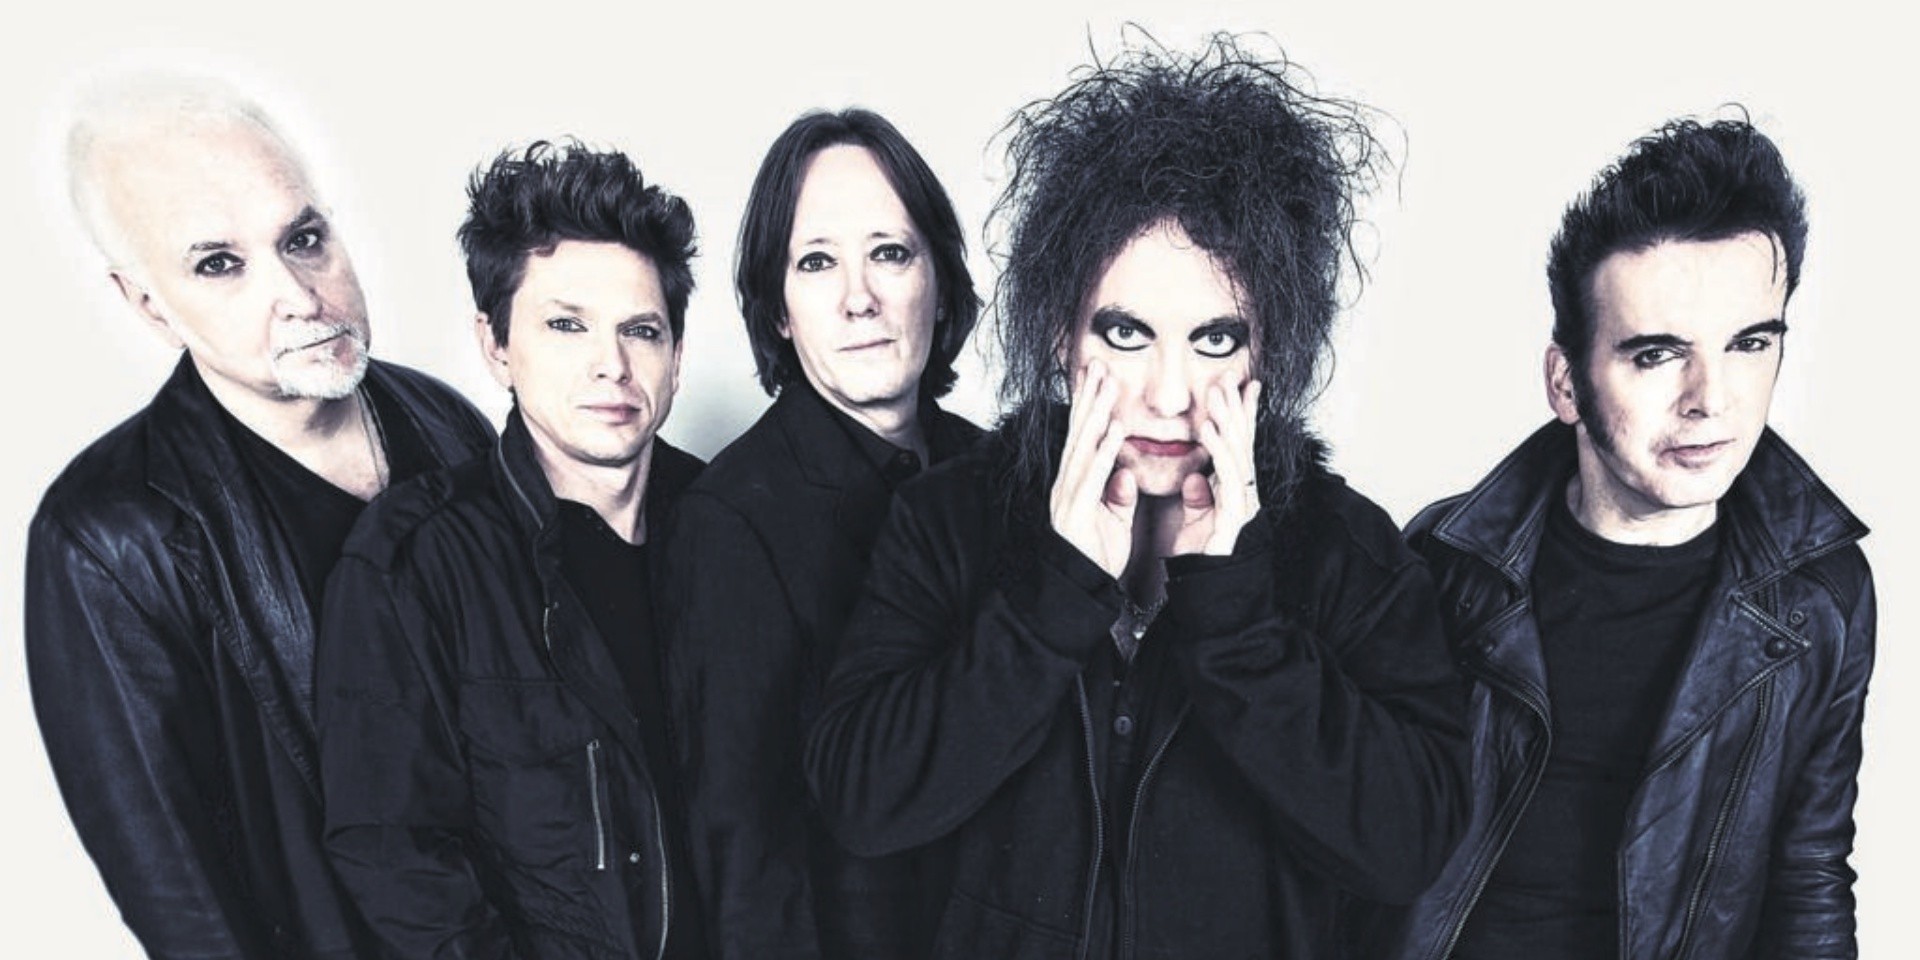 Robert Smith has confirmed that The Cure's new album is finished